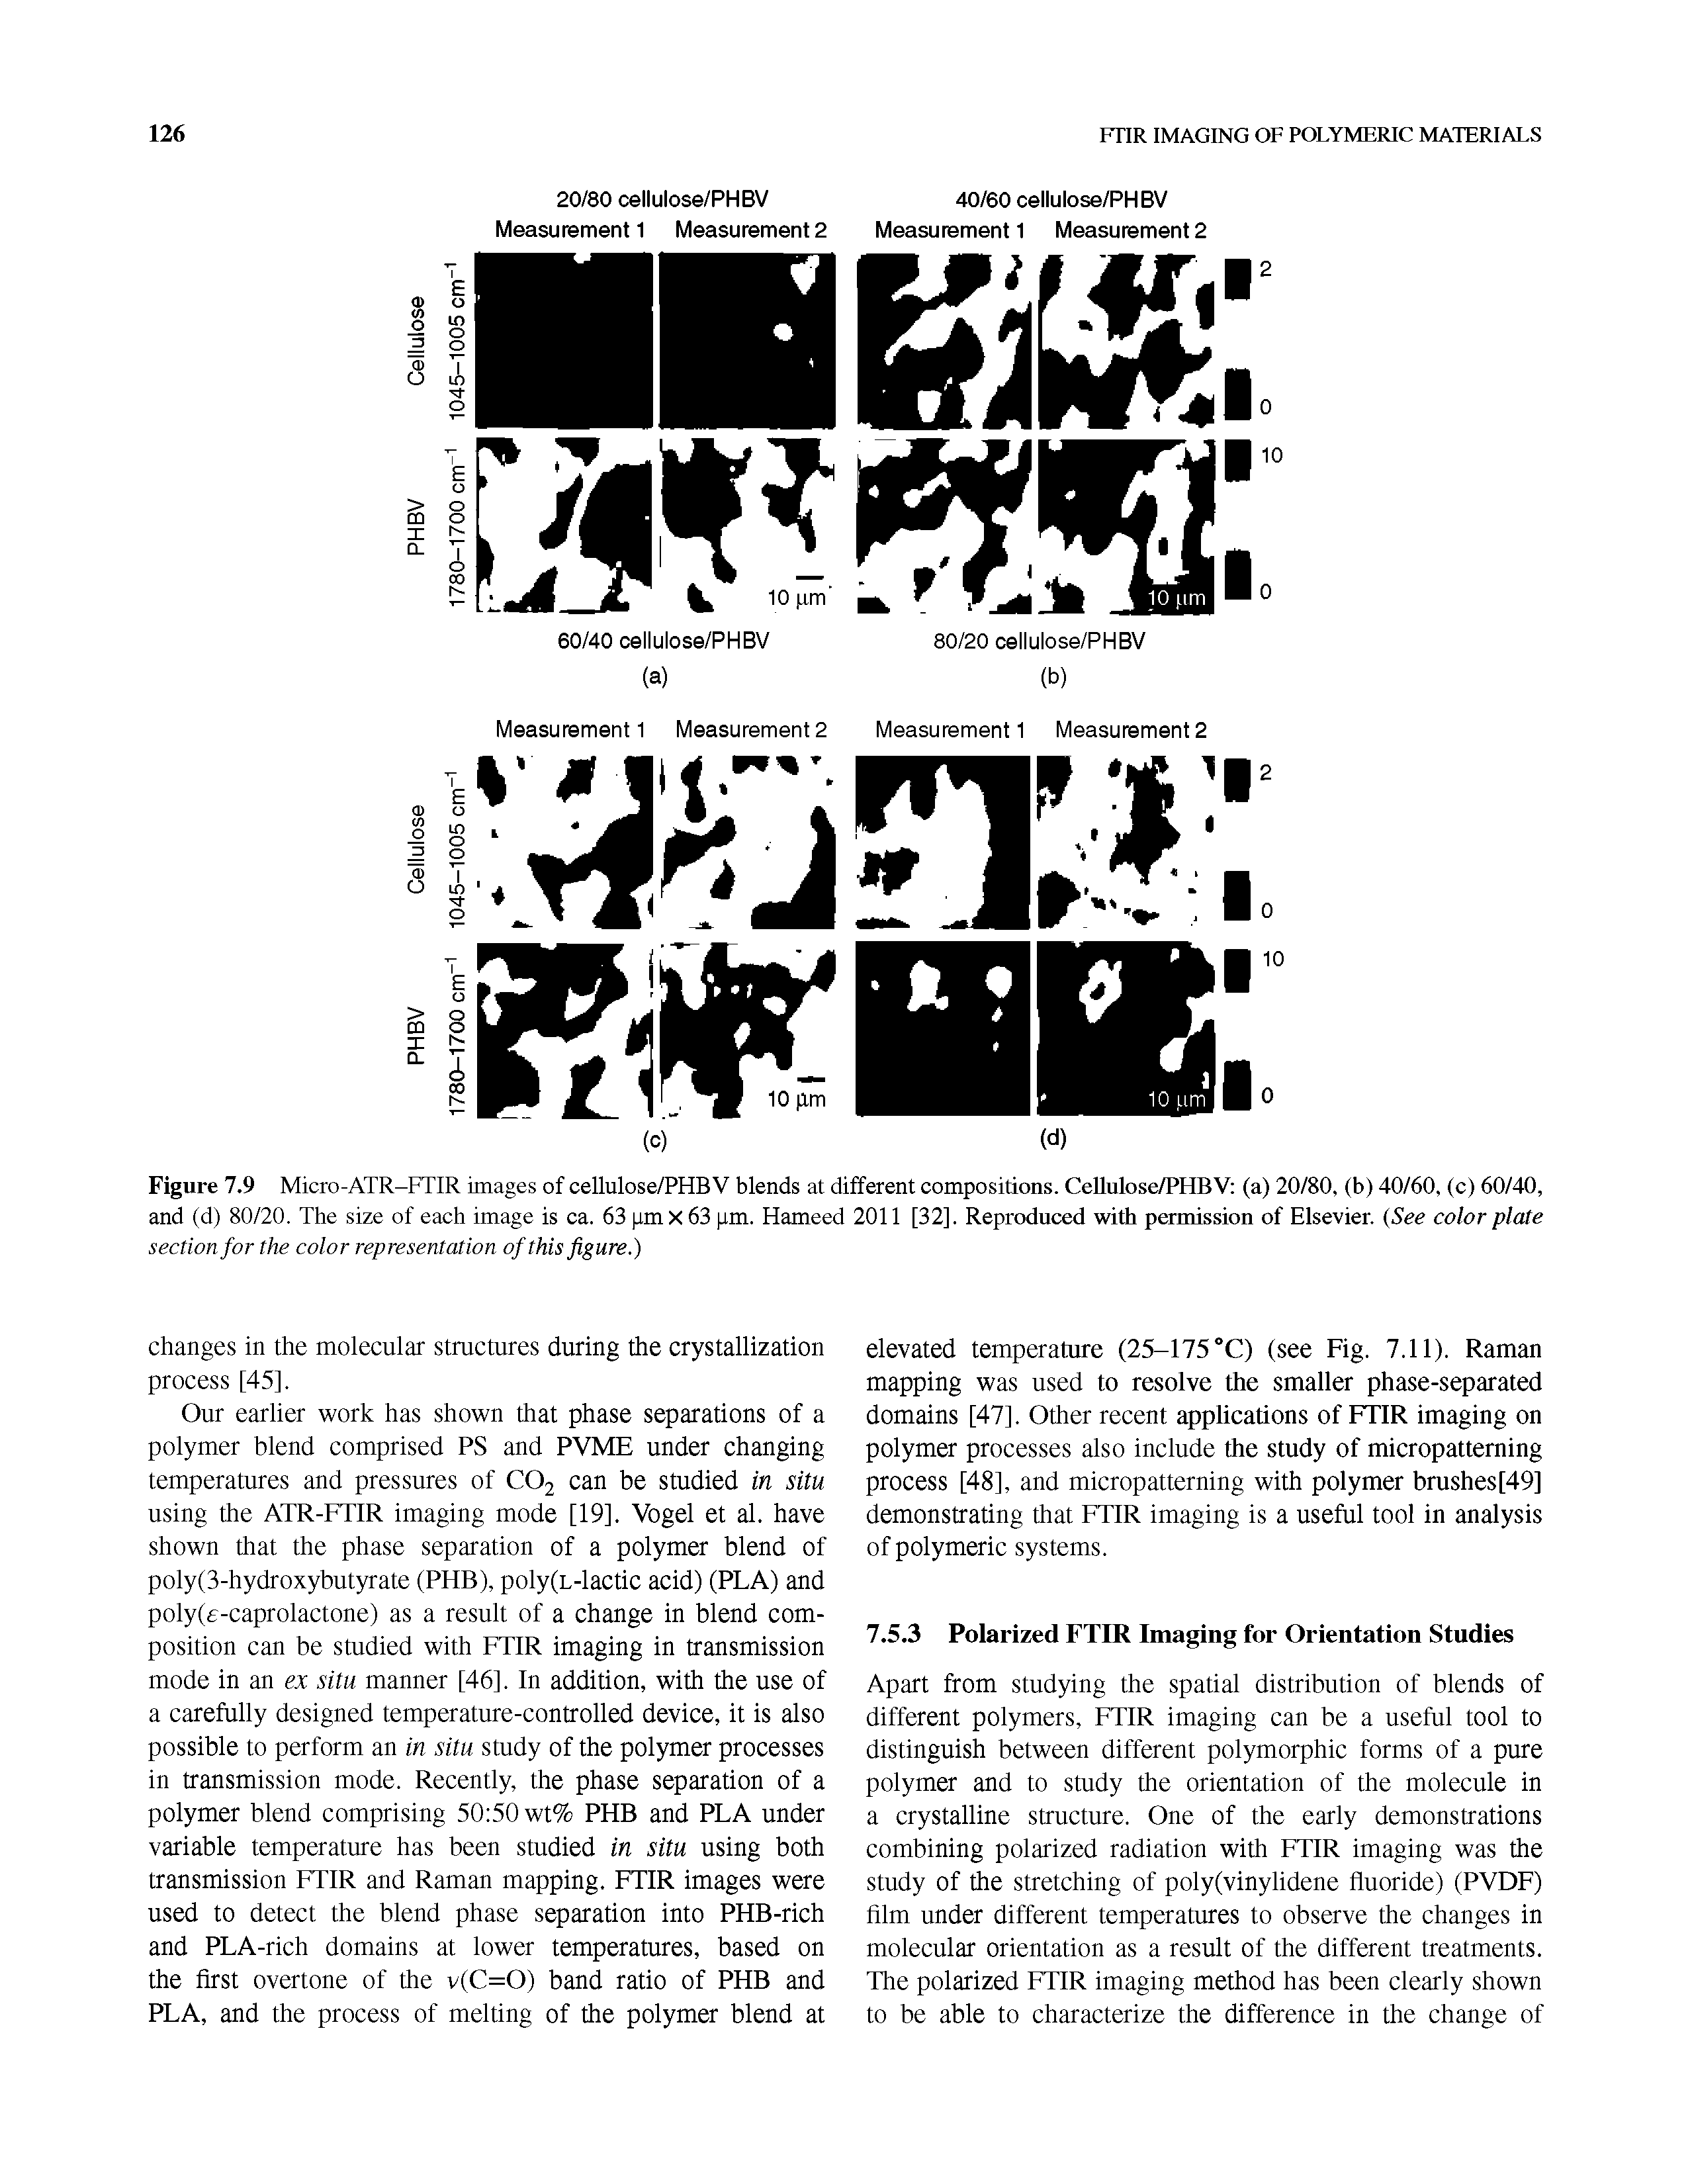 Figure 7.9 Micro-ATR-FTIR images of cellulose/PHBV blends at different compositions. CeUulose/PHBV (a) 20/80, (b) 40/60, (c) 60/40, and (d) 80/20. The size of each image is ca. 63 pm X 63 pm. Hameed 2011 [32]. Reproduced with permission of Elsevier. (See color plate...